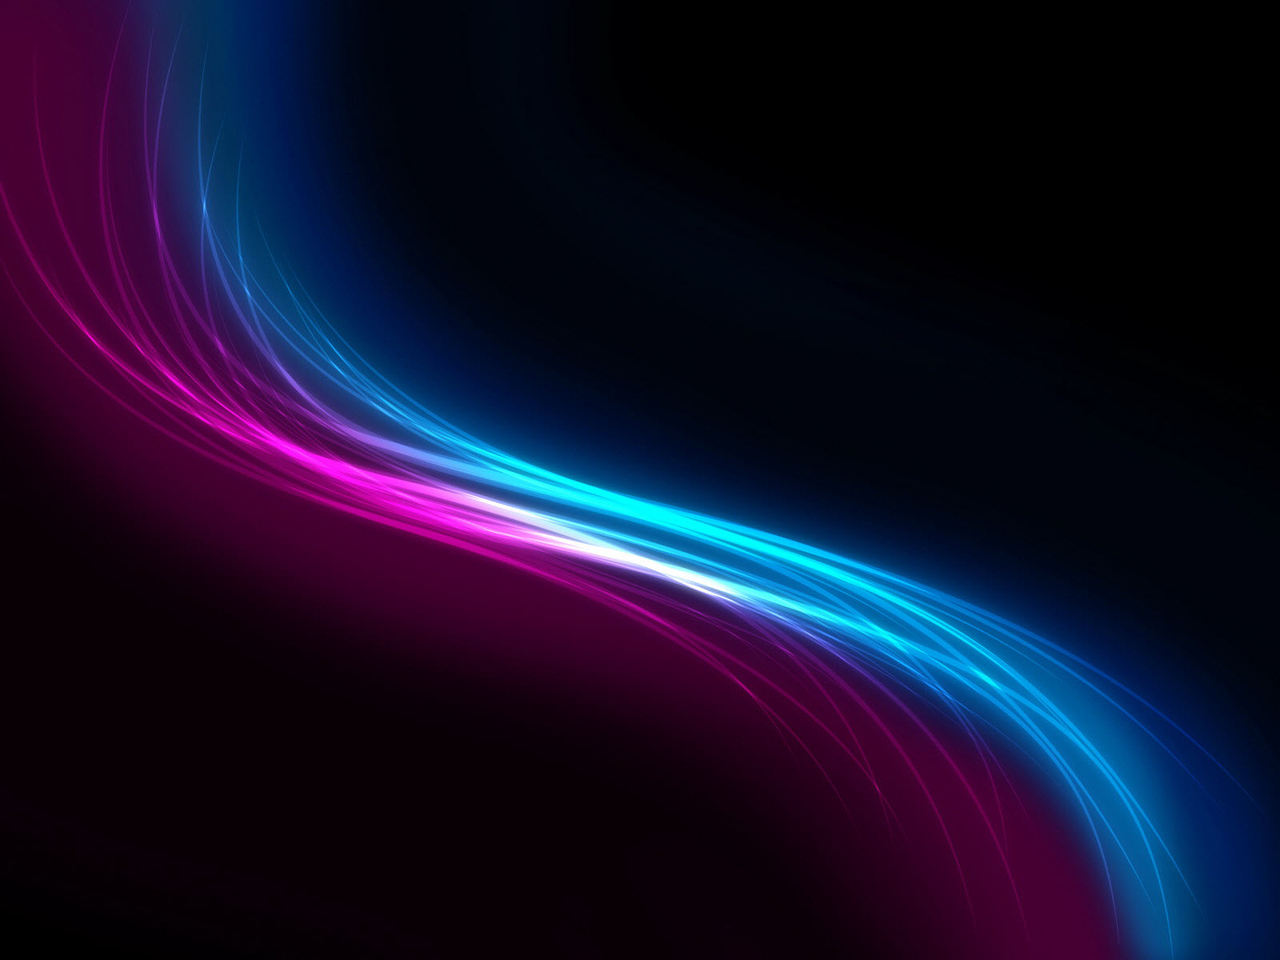 Bright Colored Desktop Background Submited Image